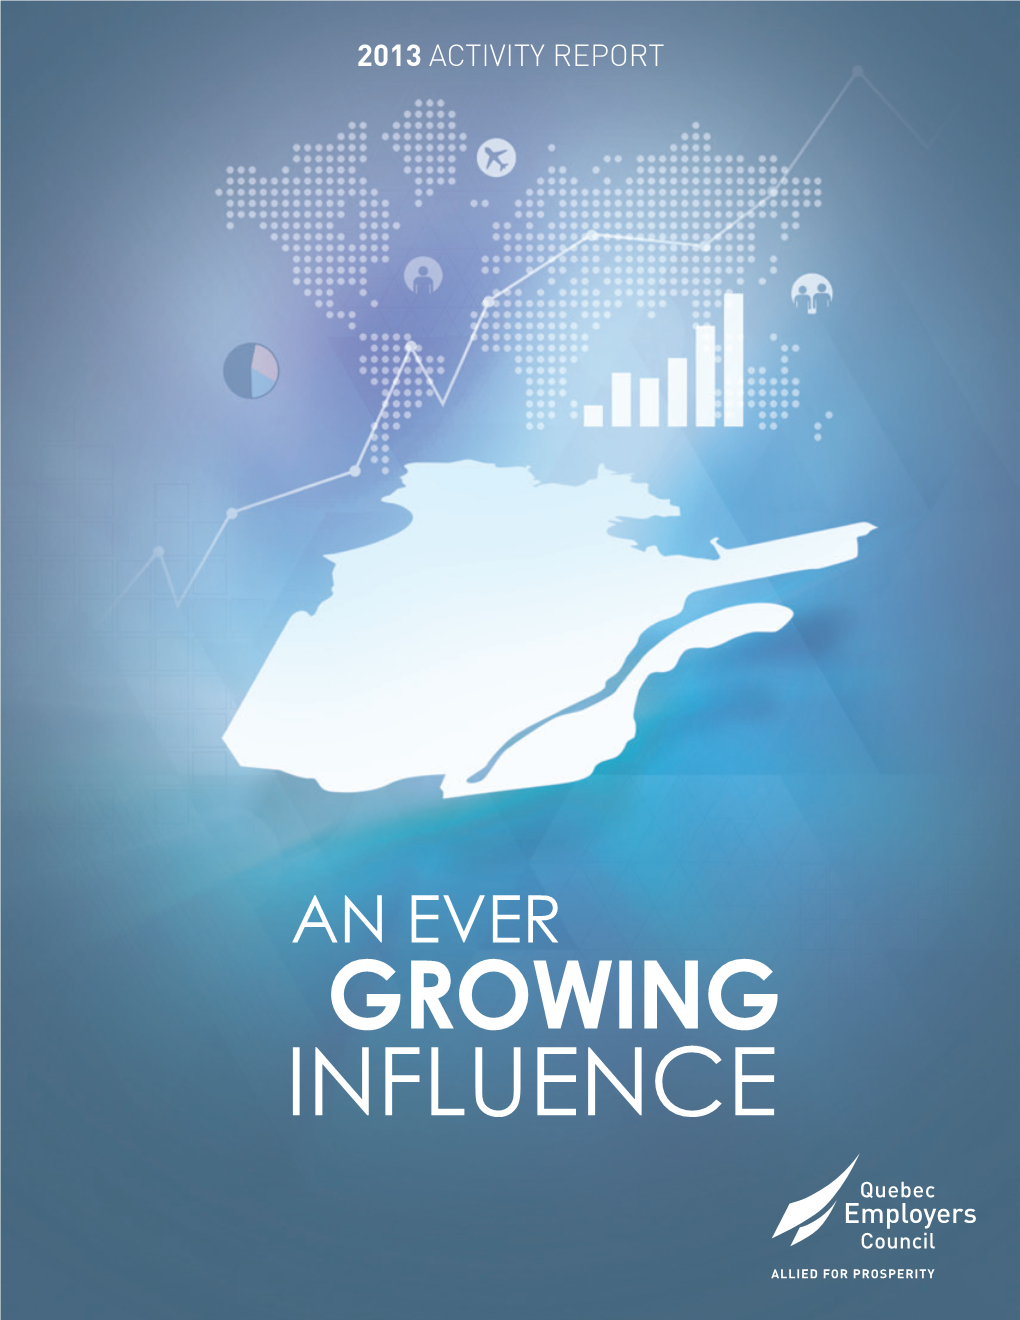 Growing Influence 2013 Activity Report the Mission, Vision and Values of the Quebec Employers Council As of December 31, 2013*